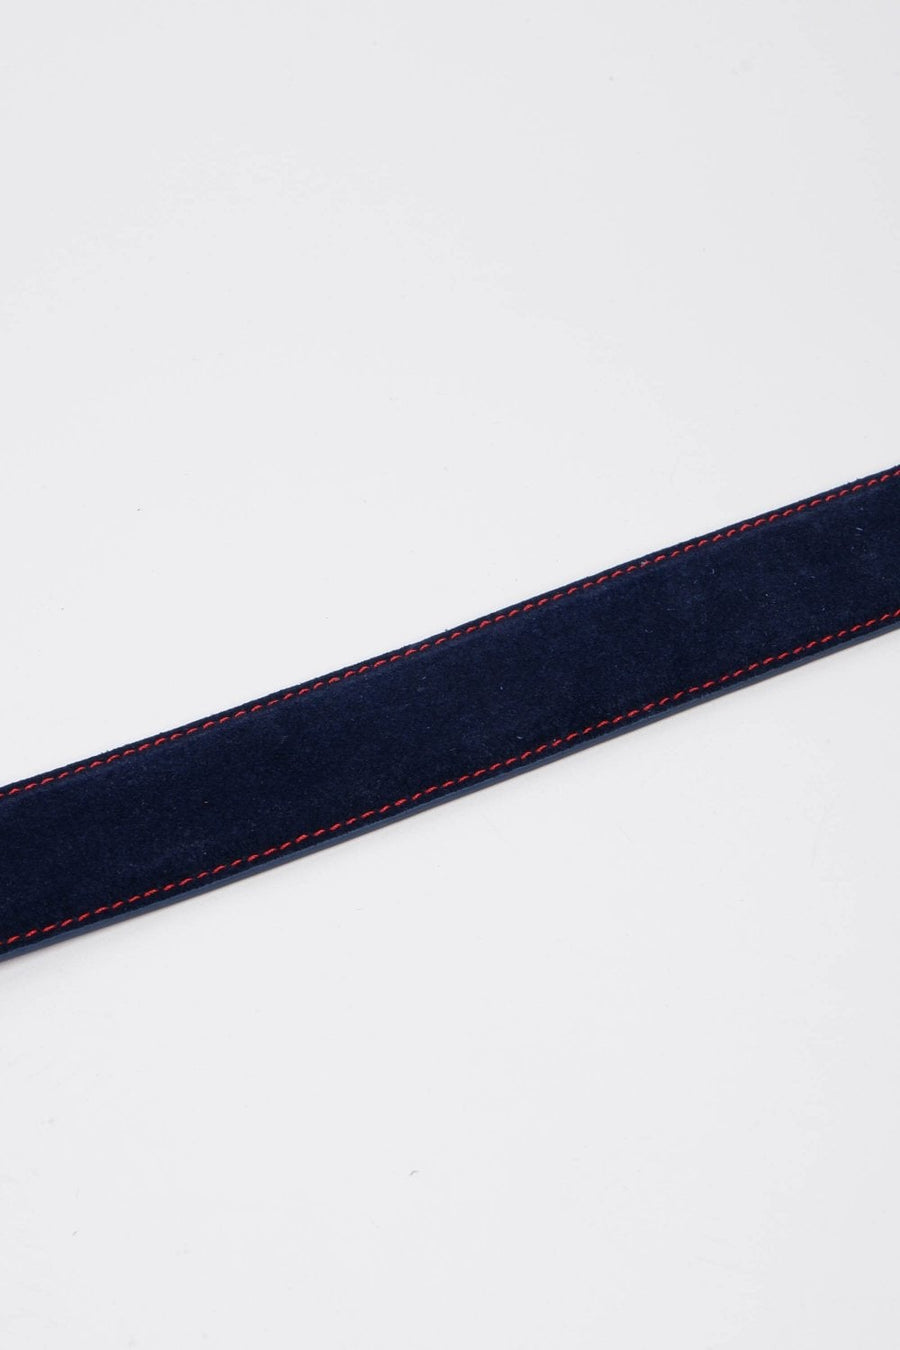 Buy the Elliot Rhodes Sinarta Suede Belt in Navy/Red at Intro. Spend £50 for free UK delivery. Official stockists. We ship worldwide.